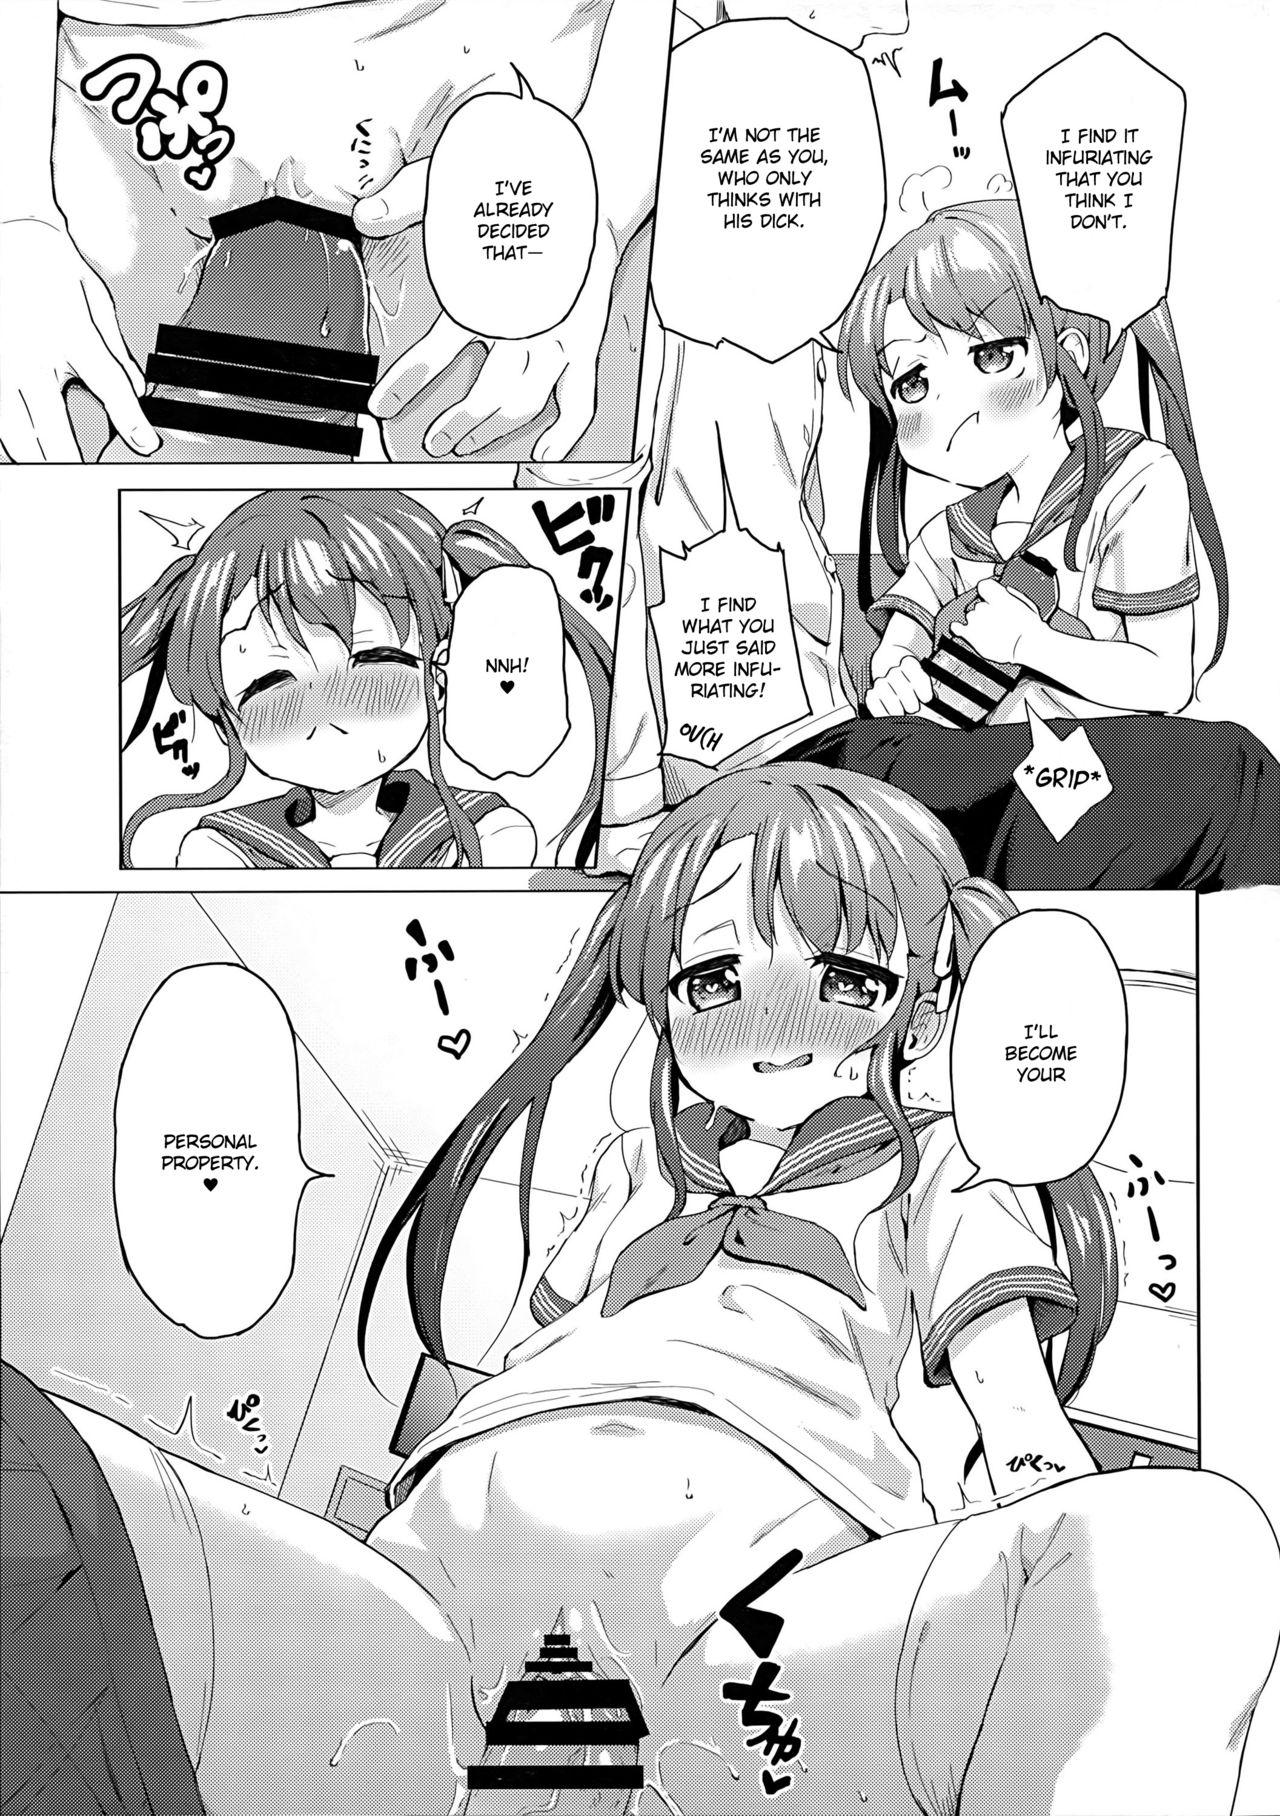 Nasty Porn Imouto wa Ani Senyou | A Little Sister Is Exclusive Only for Her Big Brother - Original 18yo - Page 8